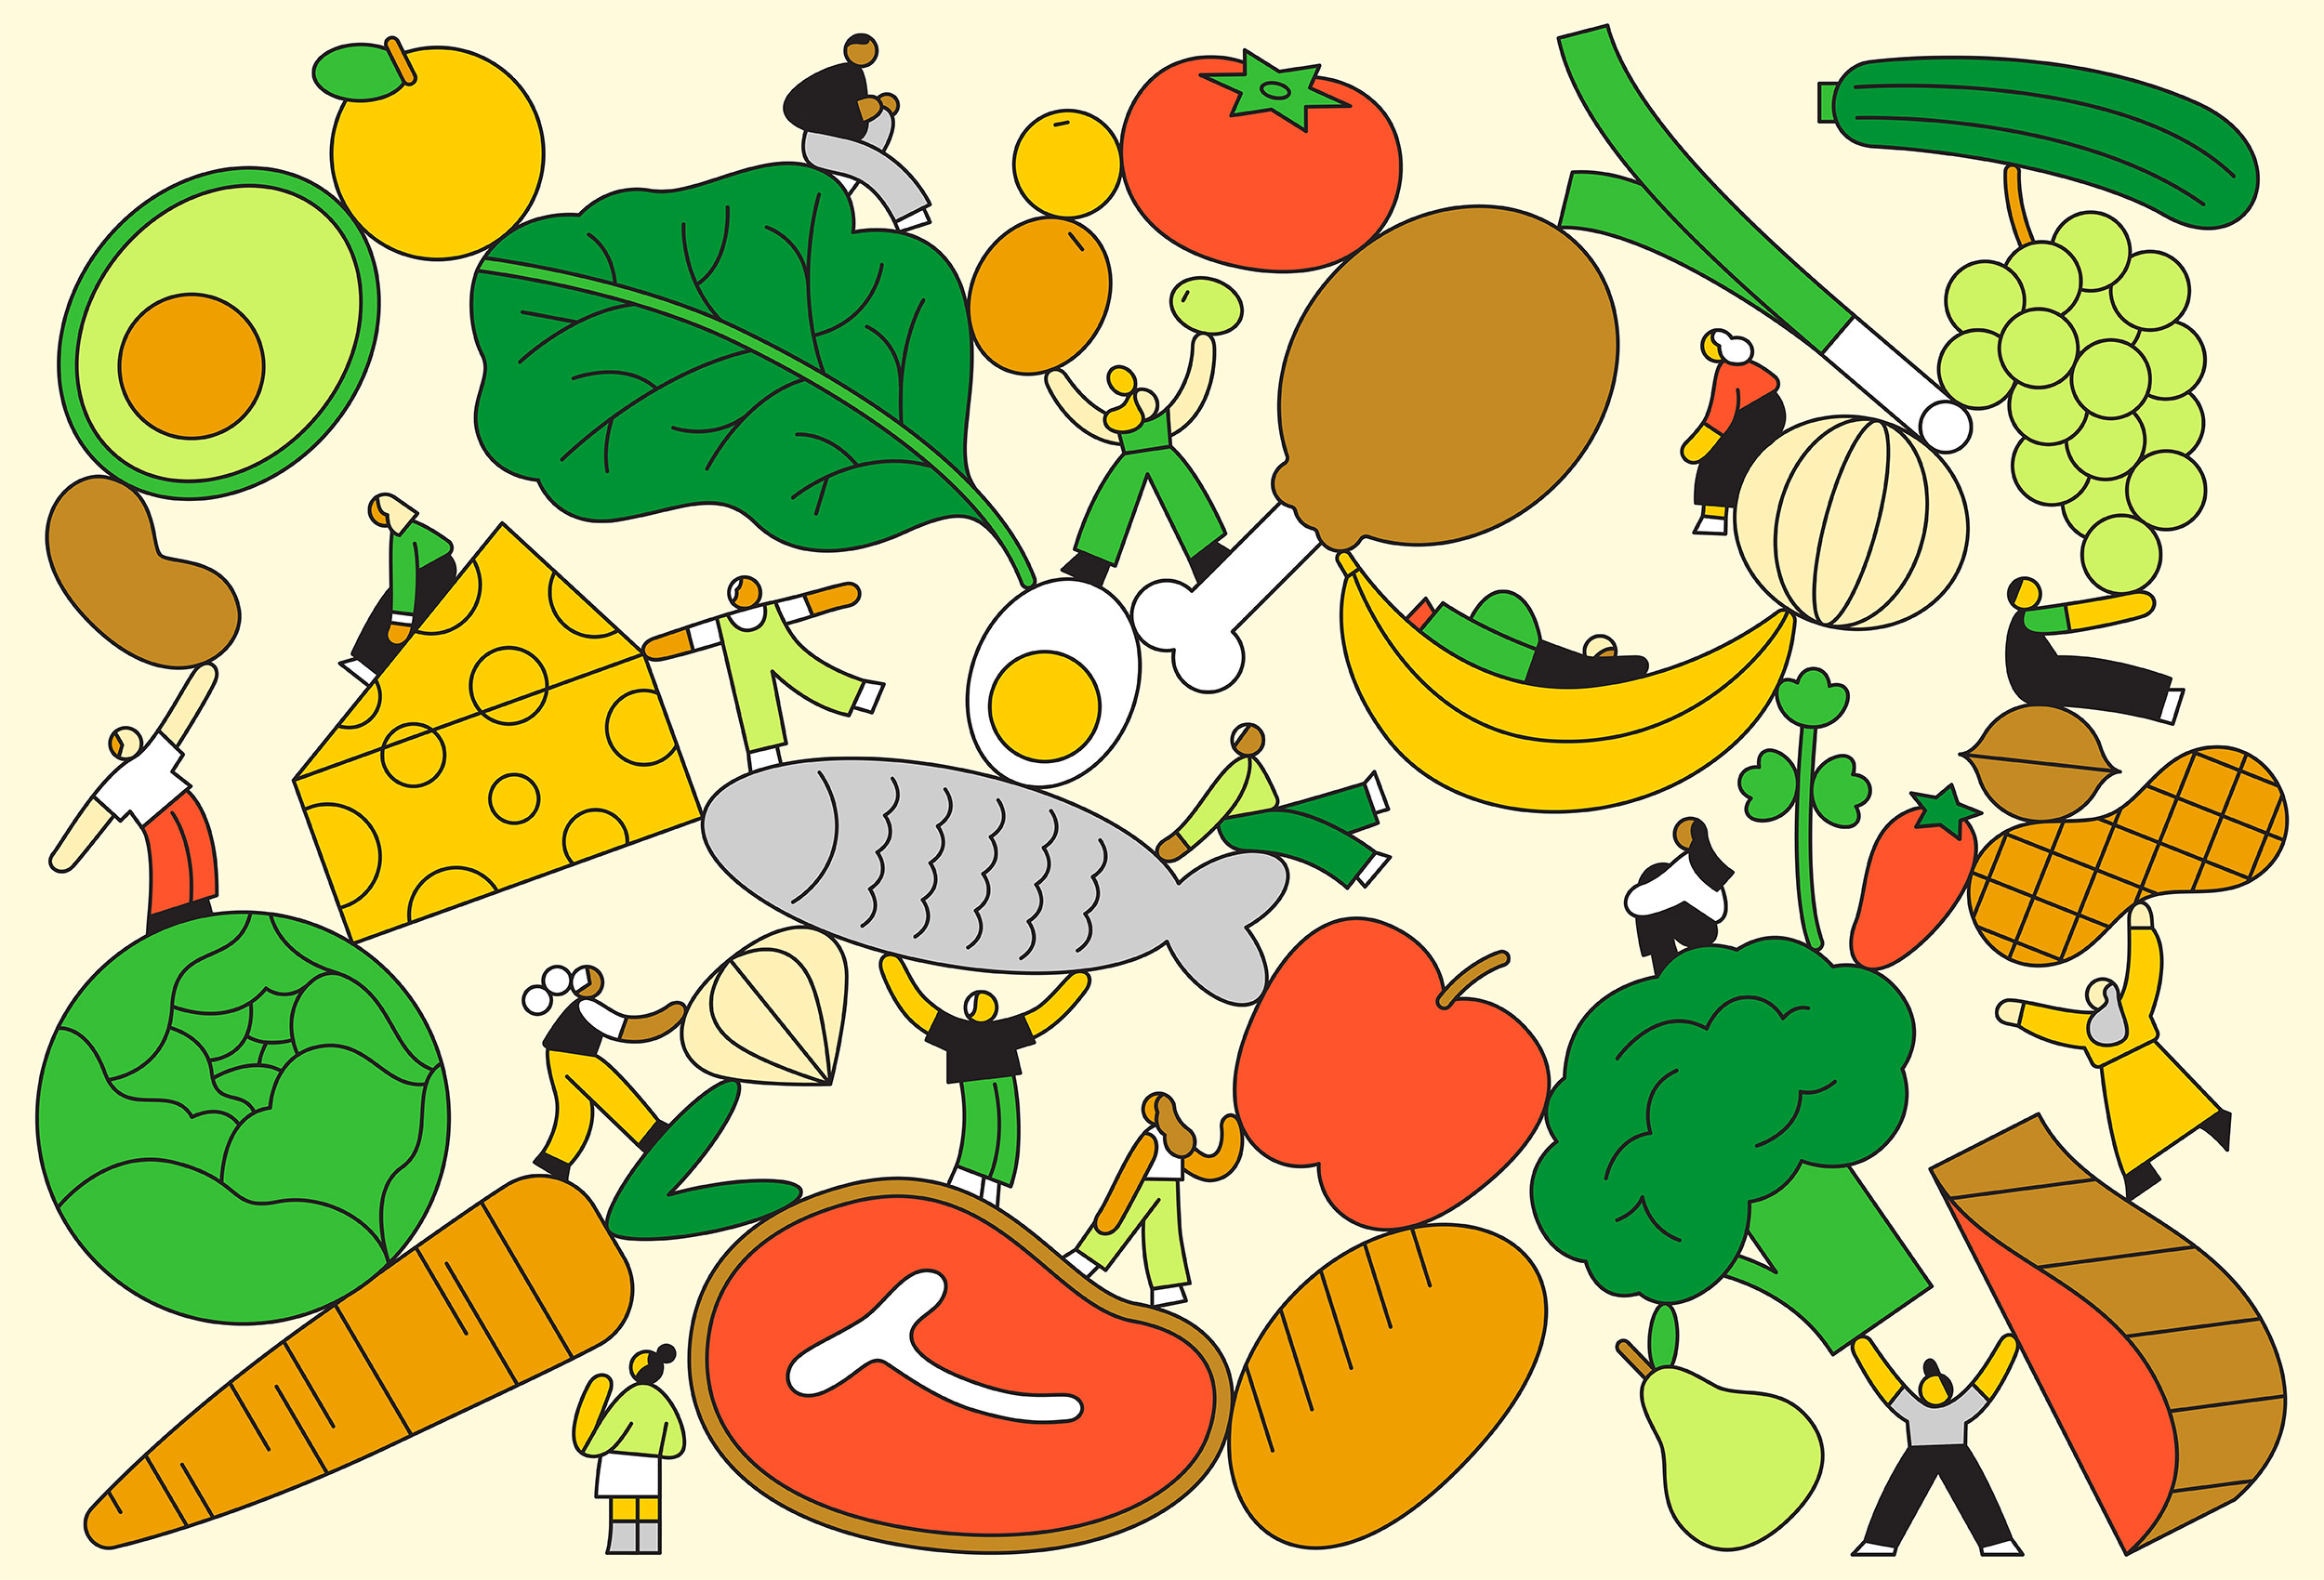 Collage of small-sized people of diverse ethnic backgrounds sitting on, lying on, hanging from or holding up giant fruits, vegetables, cheeses, meats, fish and other foods